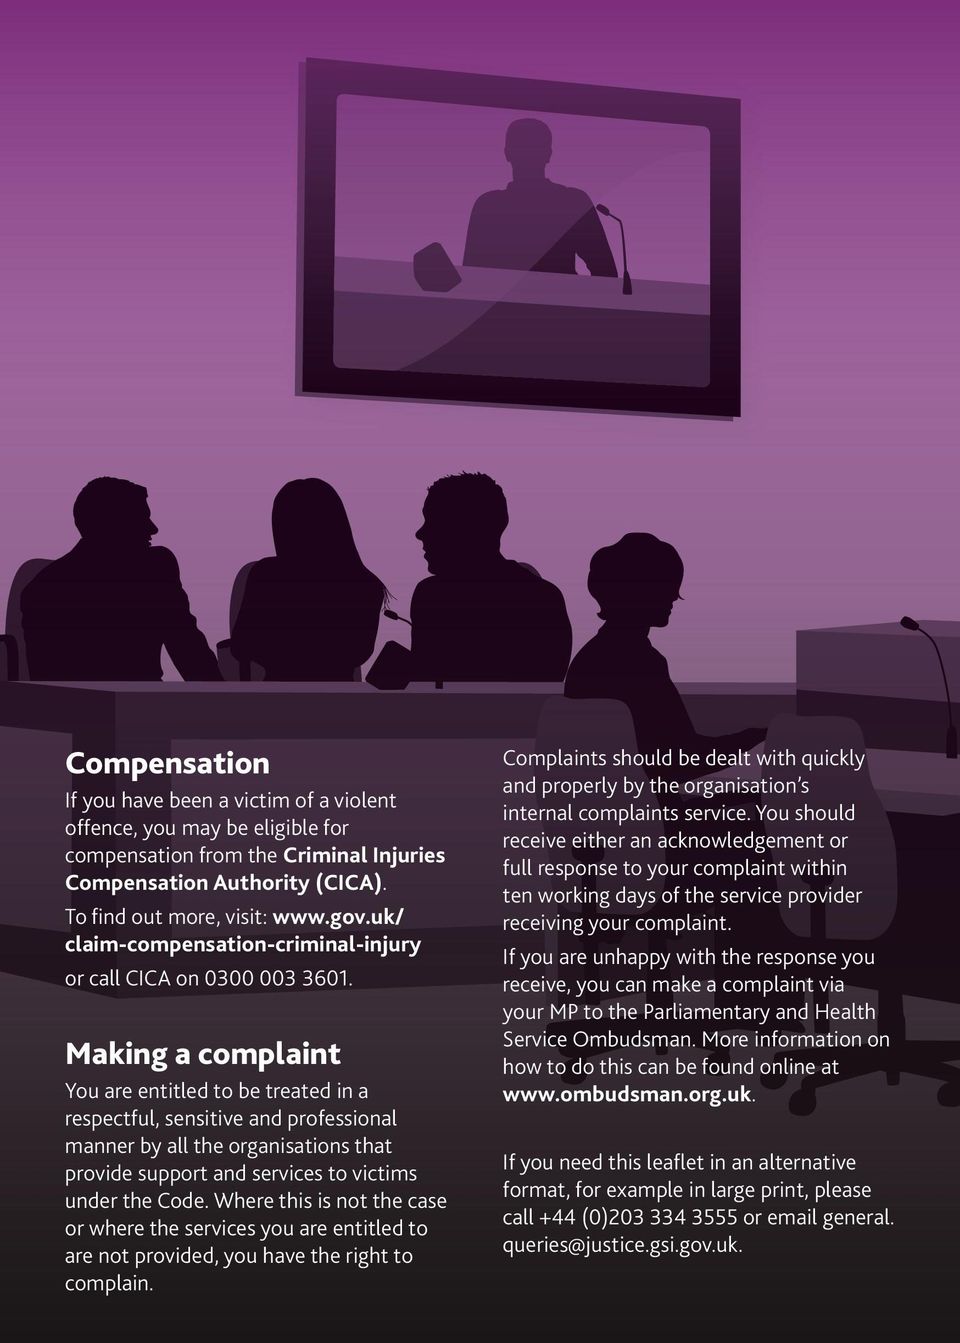 Making a complaint You are entitled to be treated in a respectful, sensitive and professional manner by all the organisations that provide support and services to victims under the Code.